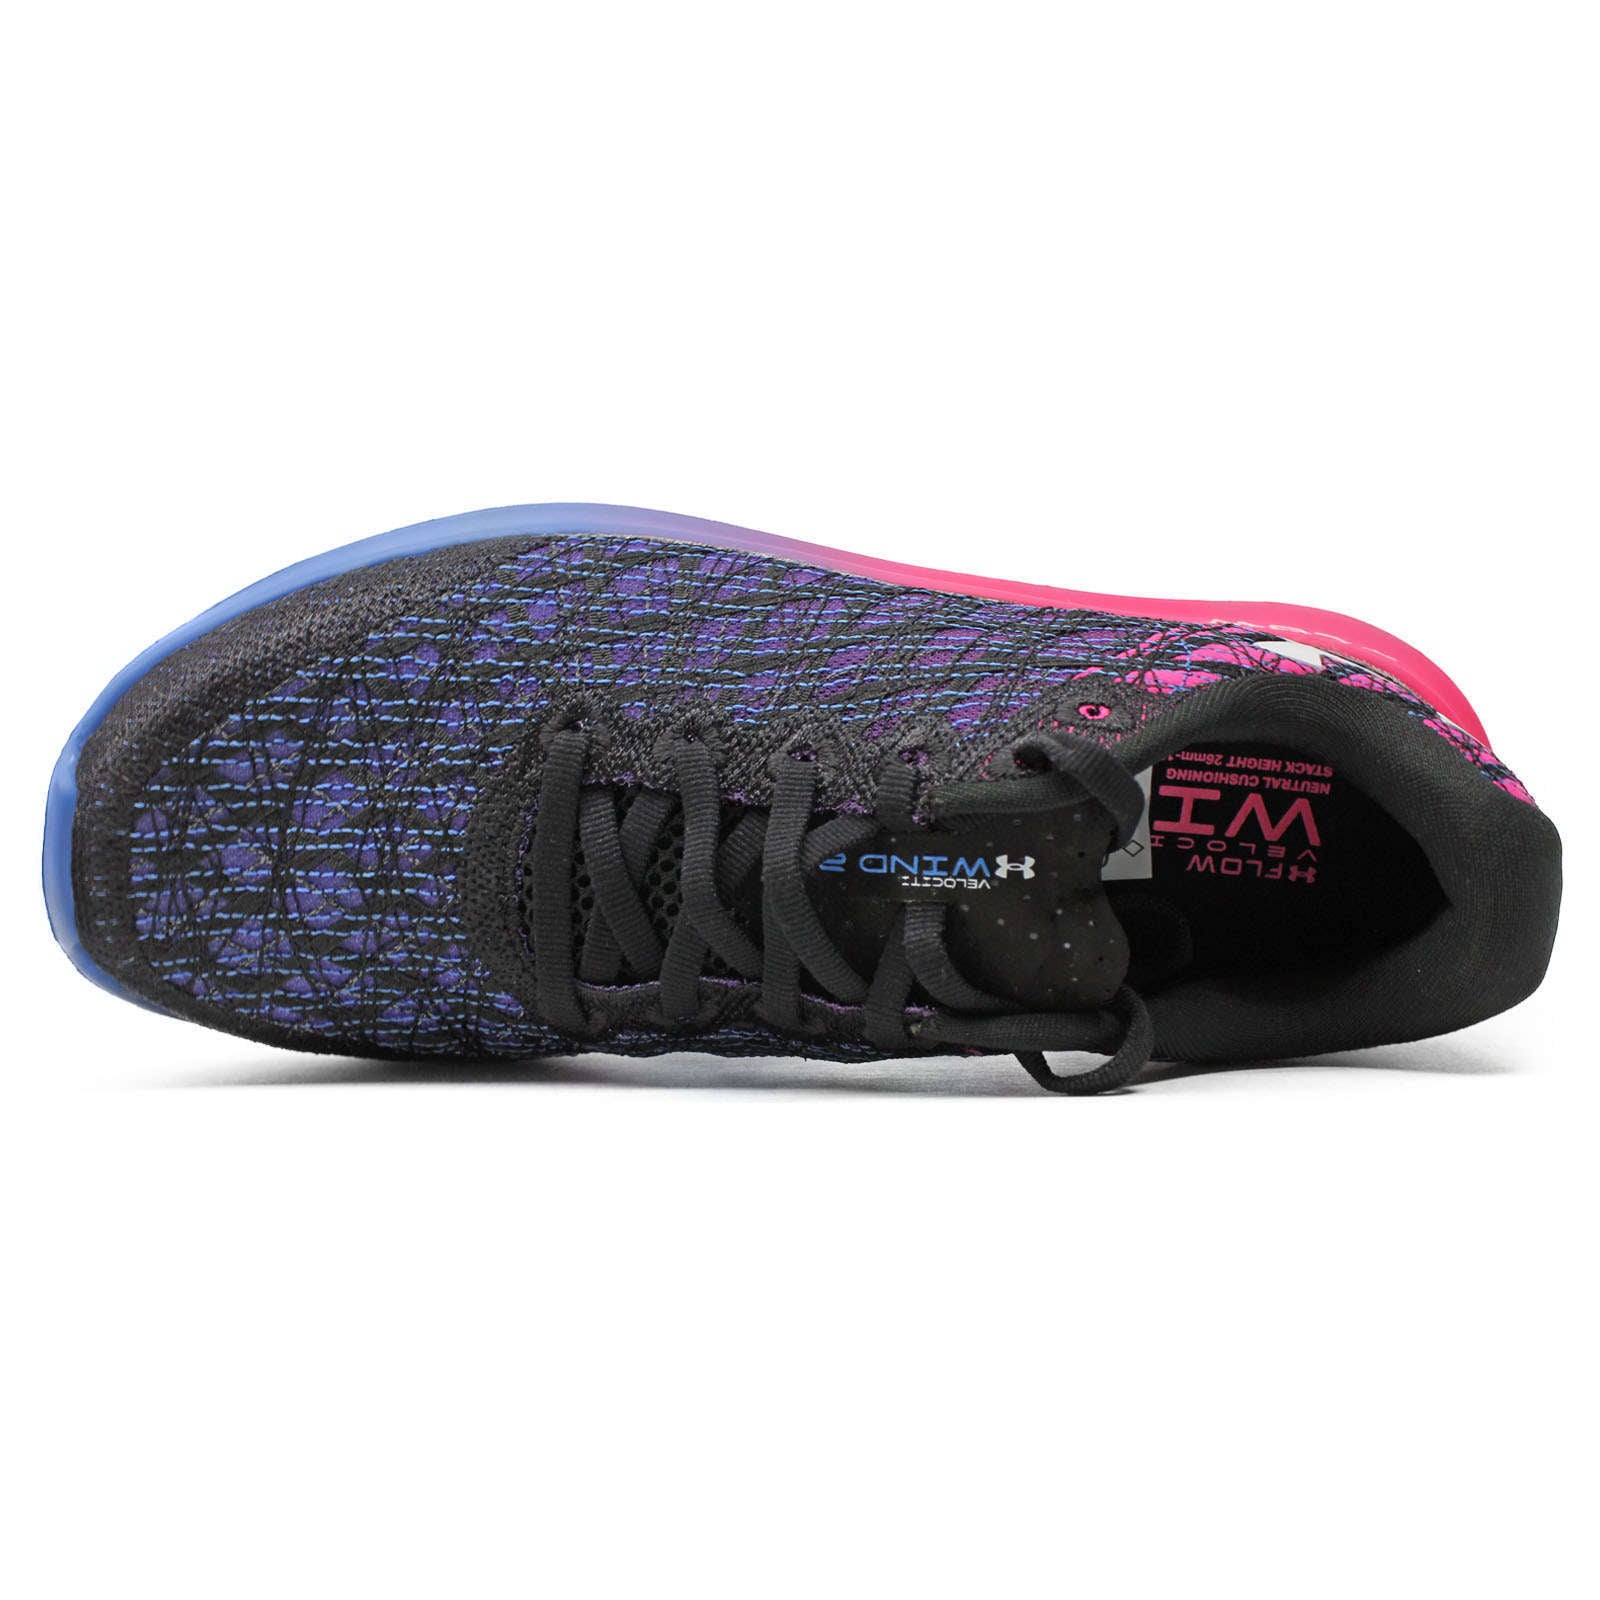 Under Armour Flow Velociti Wind 2 Synthetic Textile Women's Low-Top Trainers#color_black pink